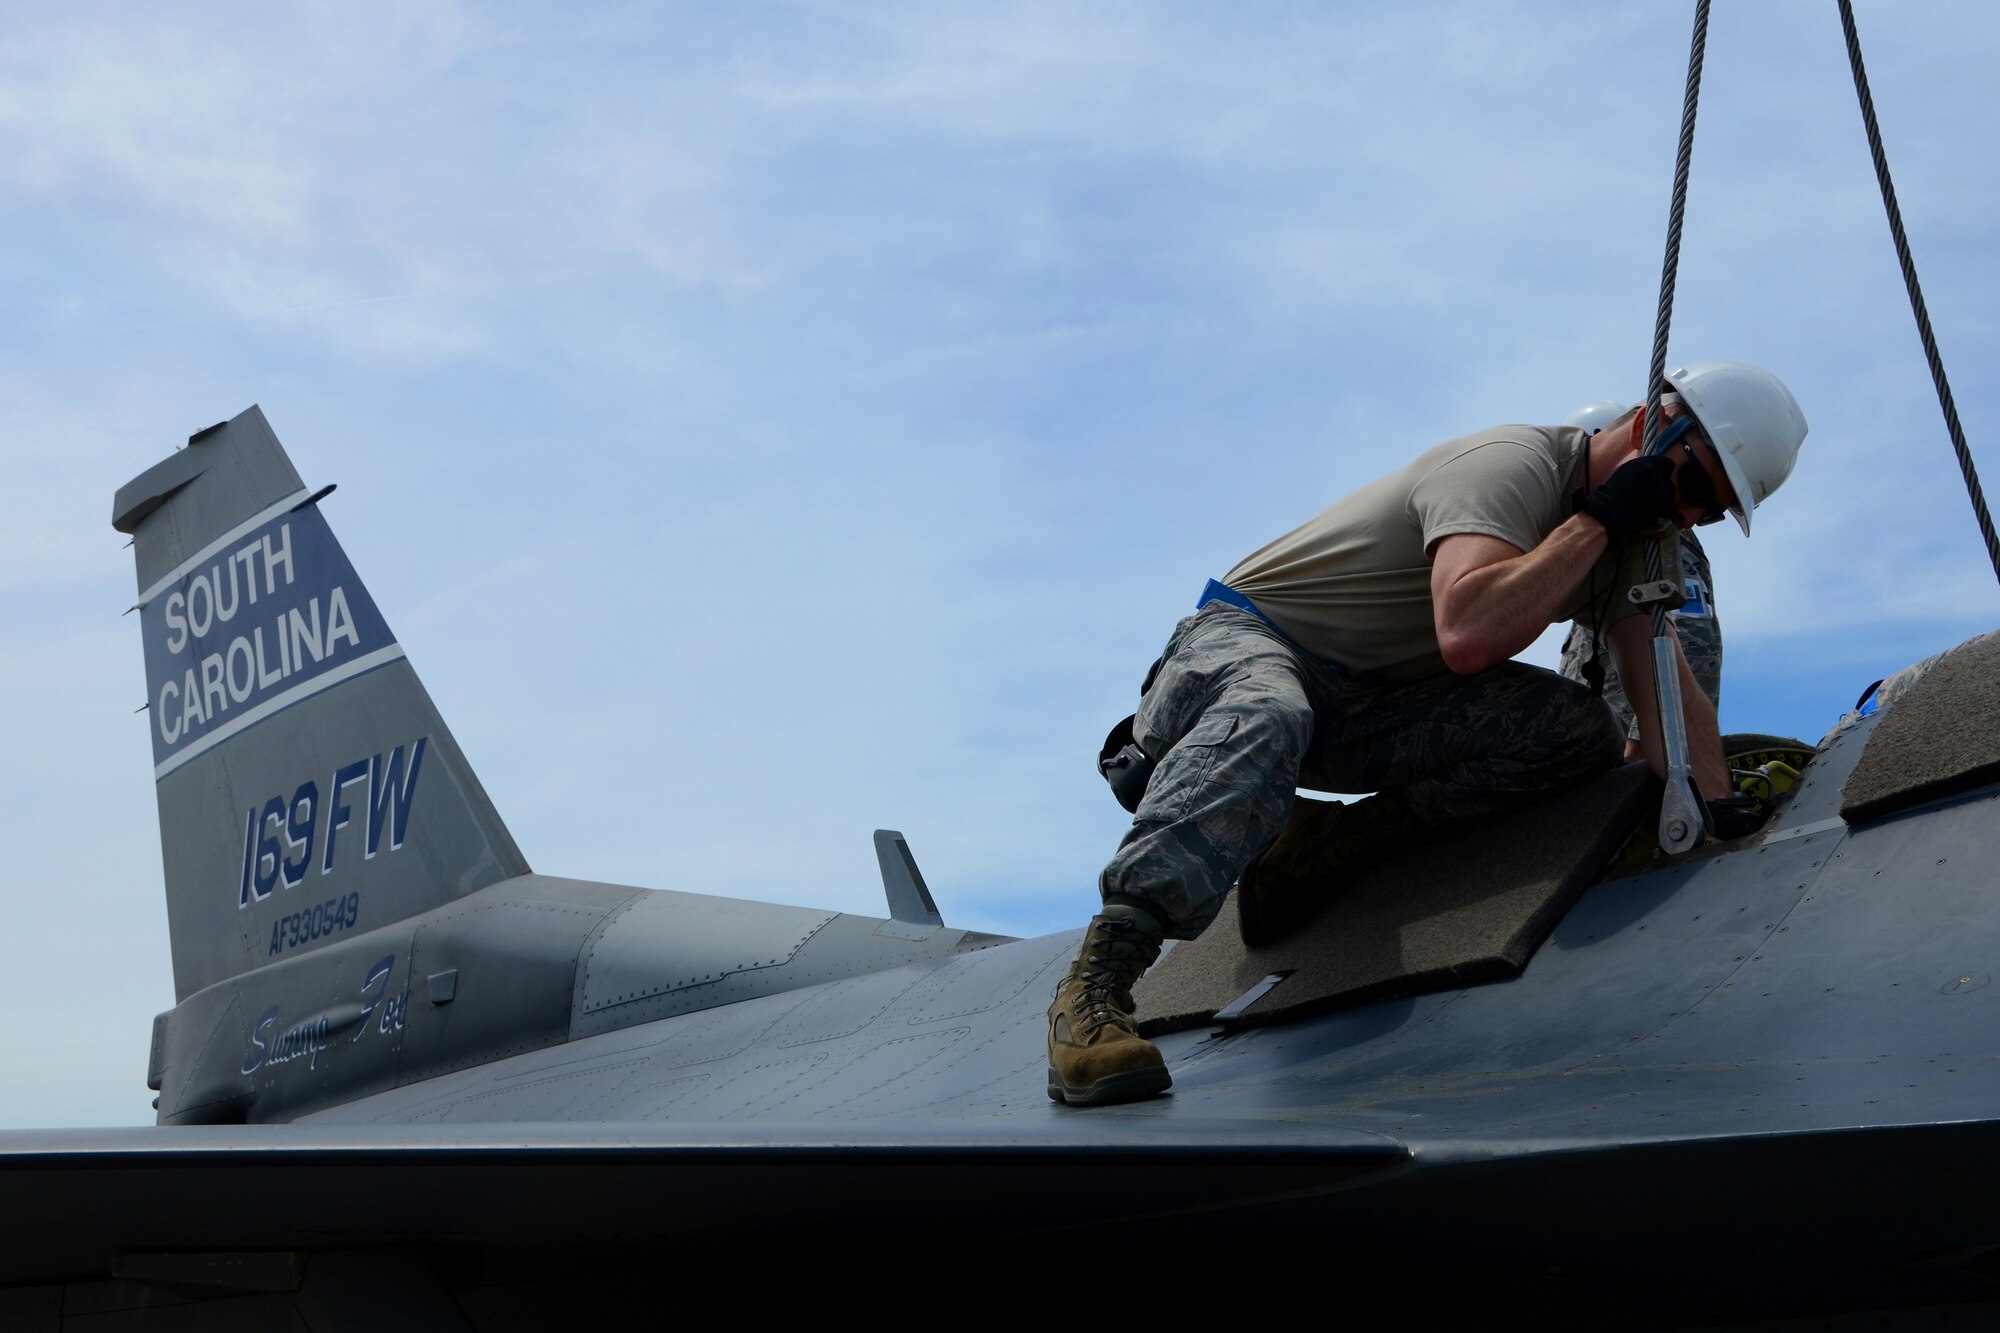 U.S. Air Force Tech. Sgt. Donald Murphy, a crew chief with the 169th Maintenance Squadron, attaches an aircraft hoisting sling onto an F-16 Fighting Falcon during a Major Aircraft Recovery Exercise (MARE) May 6, 2015 at McEntire Joint National Guard Base, S.C. The MARE exercise was a base-wide training simulation to determine how McEntire would respond to an aircraft crash. (U.S. National Guard photo by Amn Megan Floyd/Released)